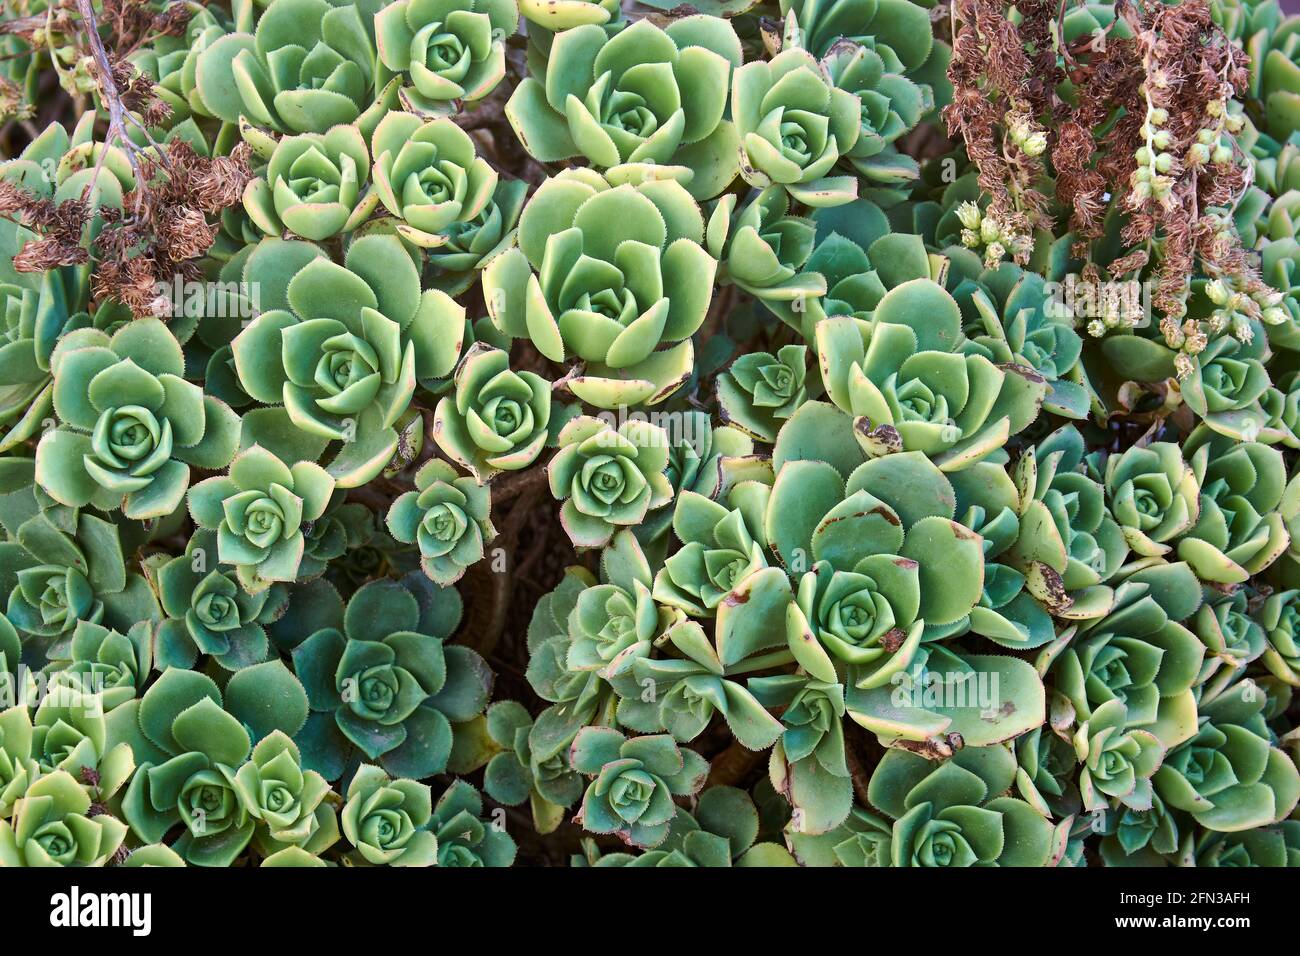 Background of big succulent echeveria plant growing free in garden of house, group of leaves forming abstract pattern. Top view. Stock Photo